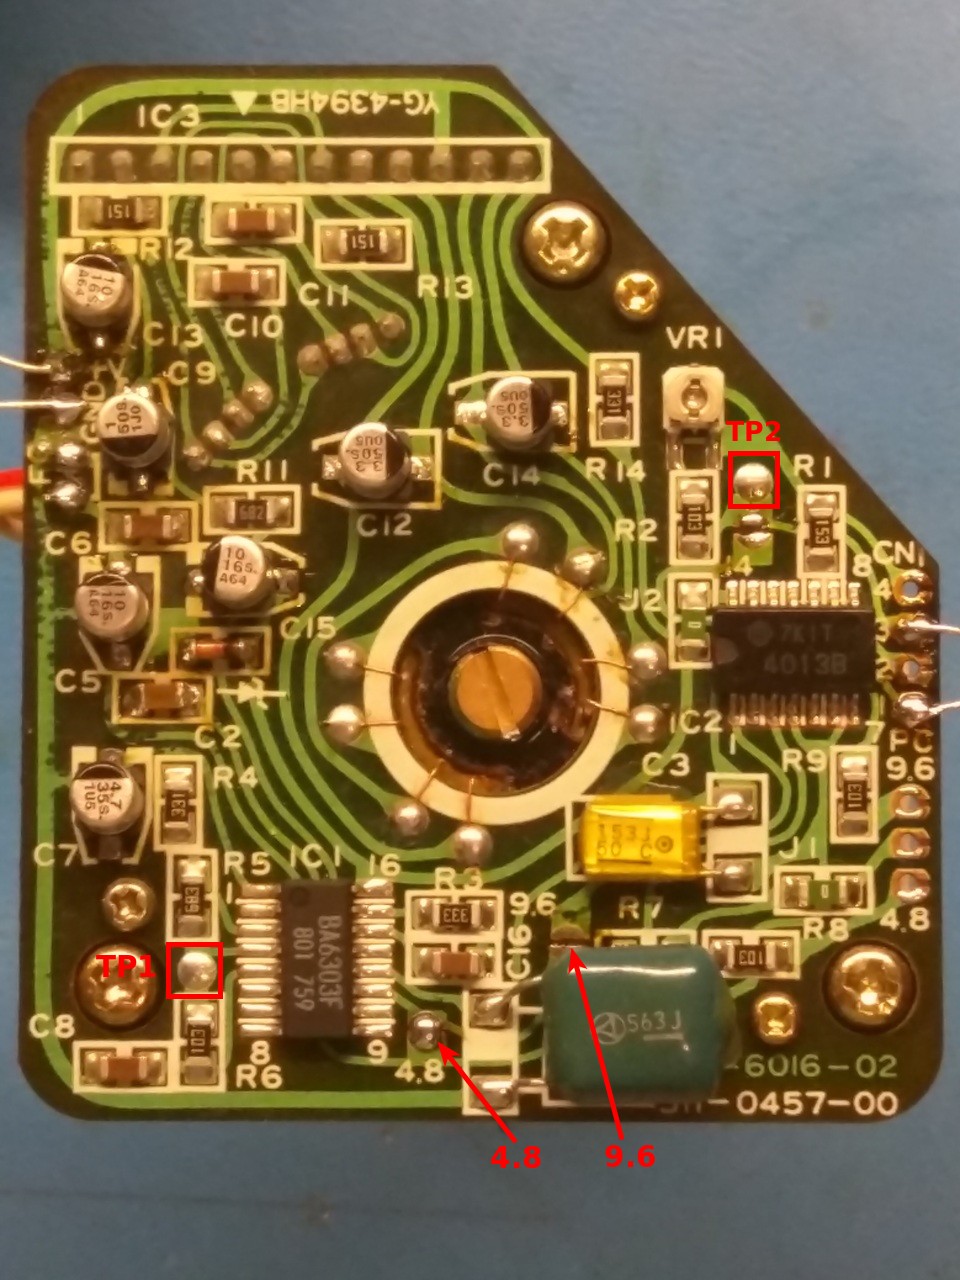 Capstan board with locations of TP1 and TP2, as well as solder jumpers to select either 4.8 or 9.6 cm/s tape speed. Only one jumper should be shorted at a time!